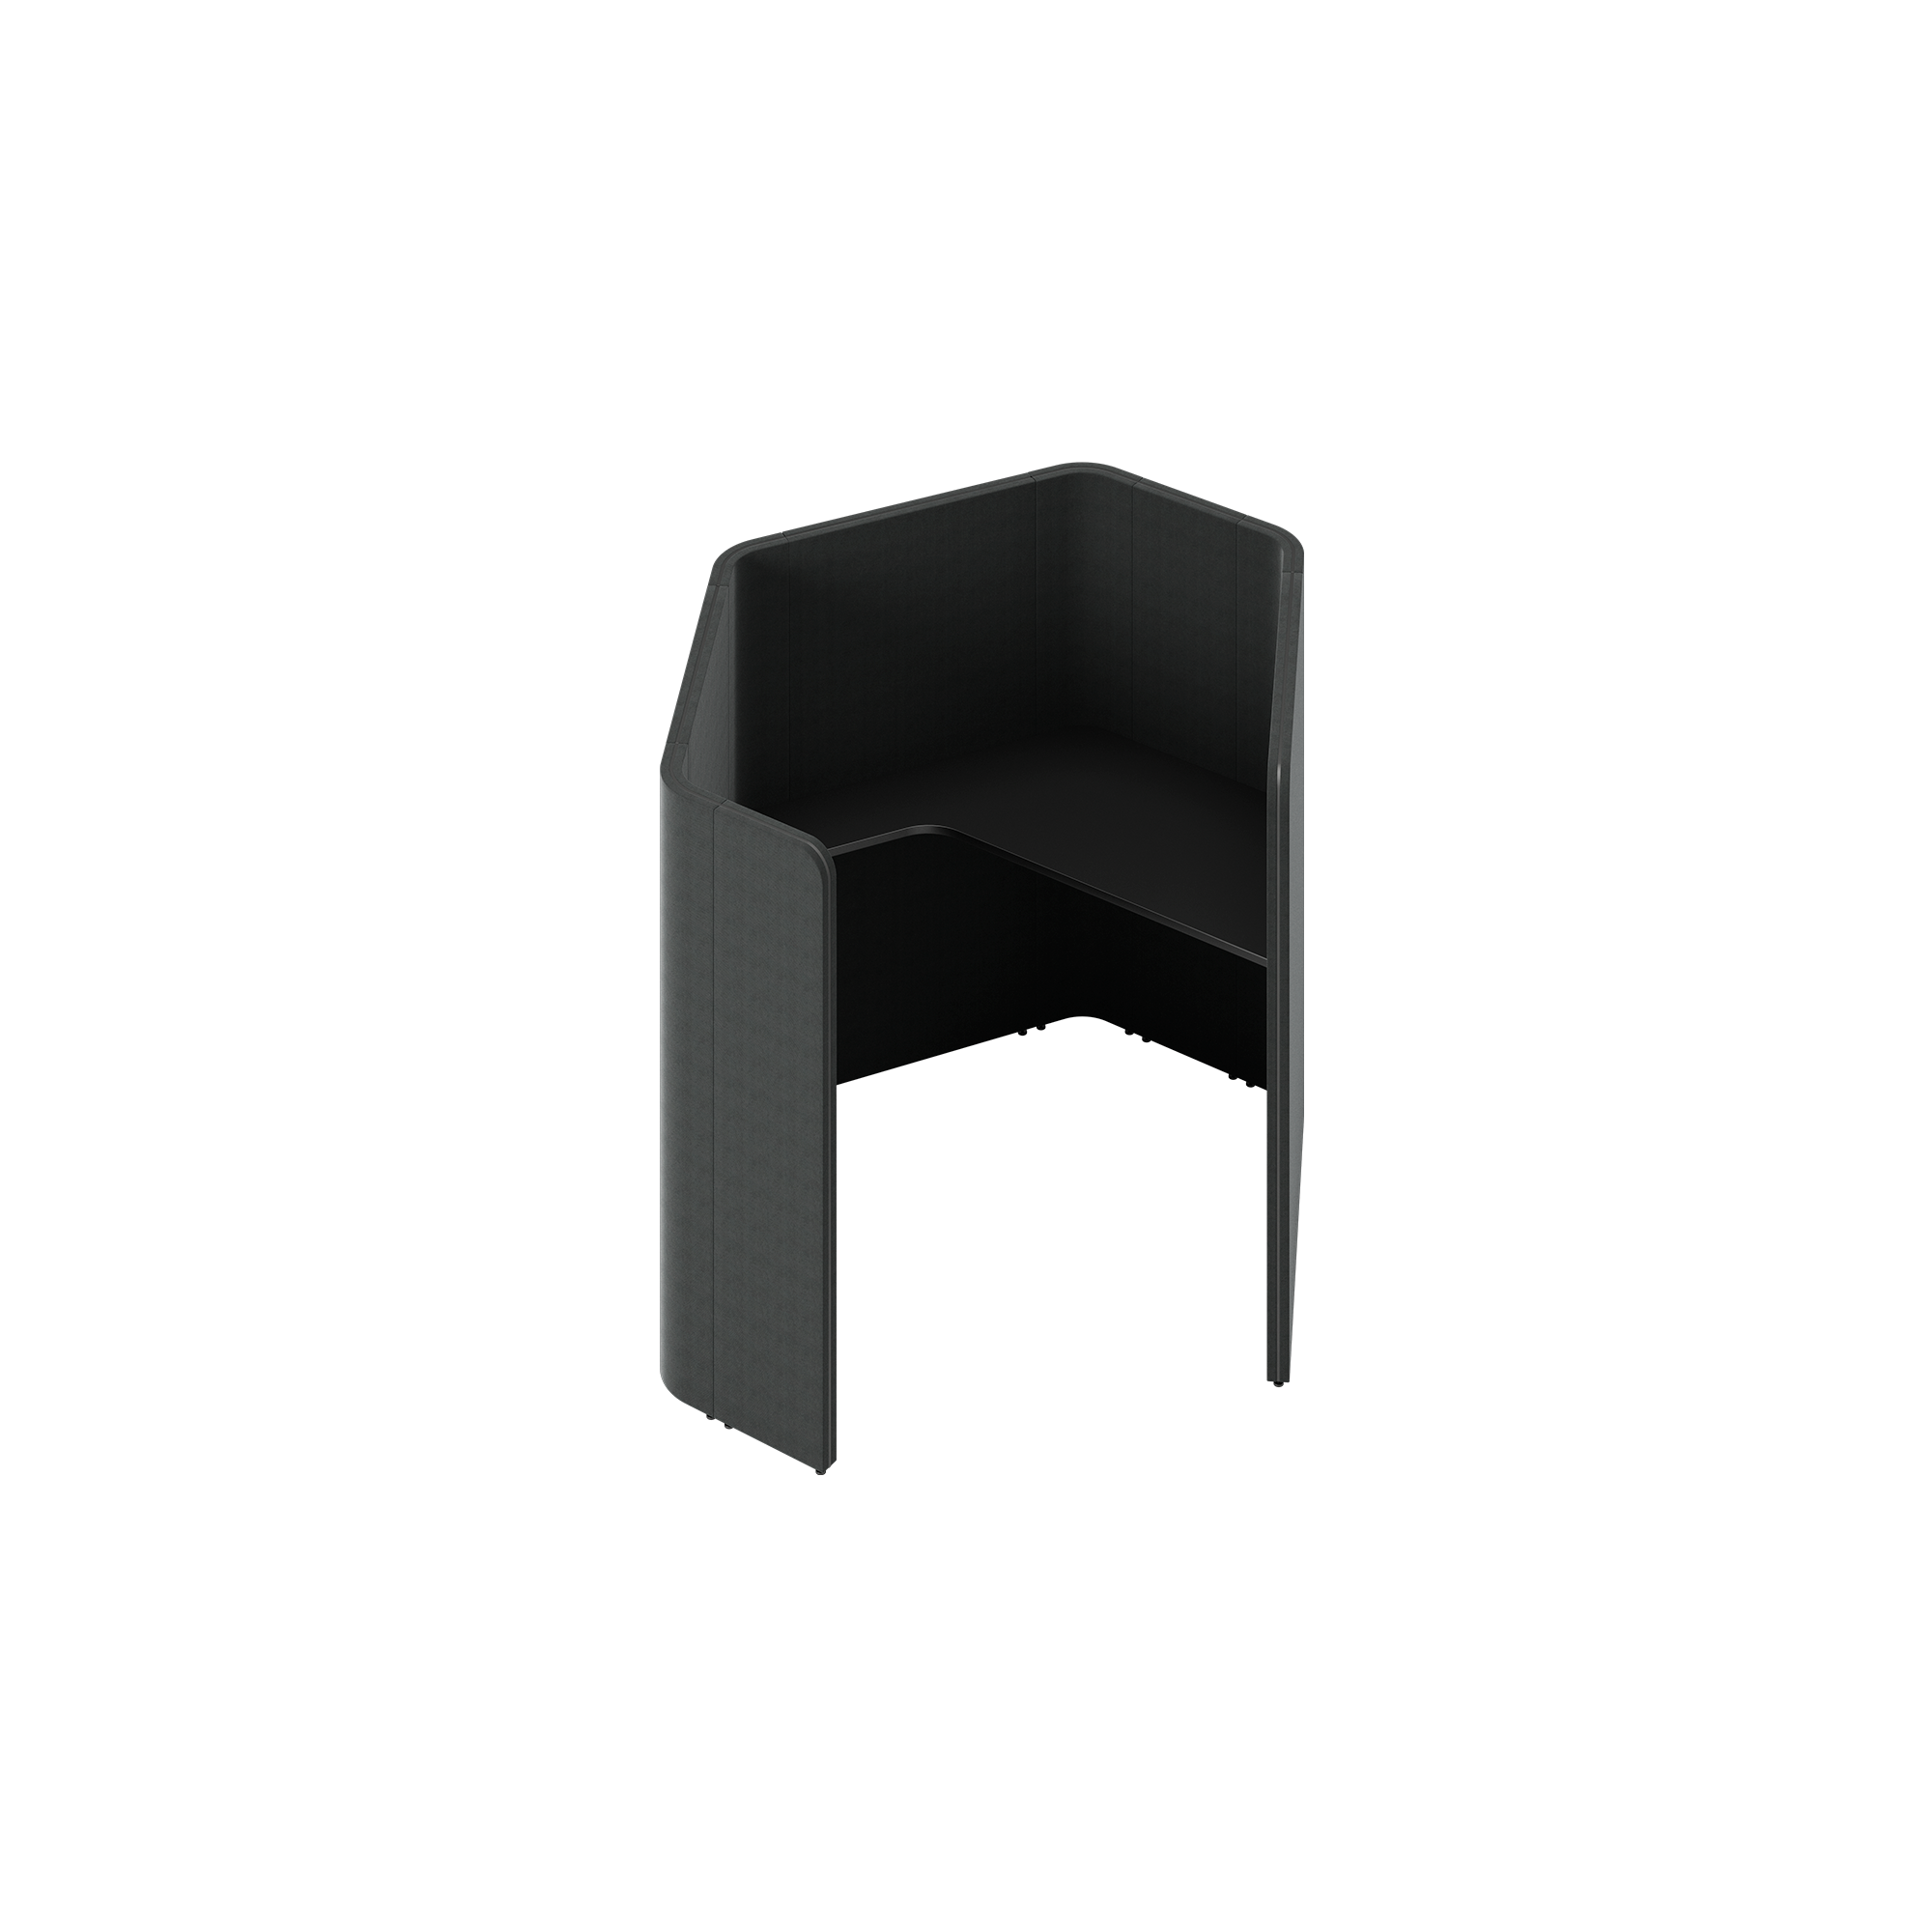 A black study booth with 1 compartment